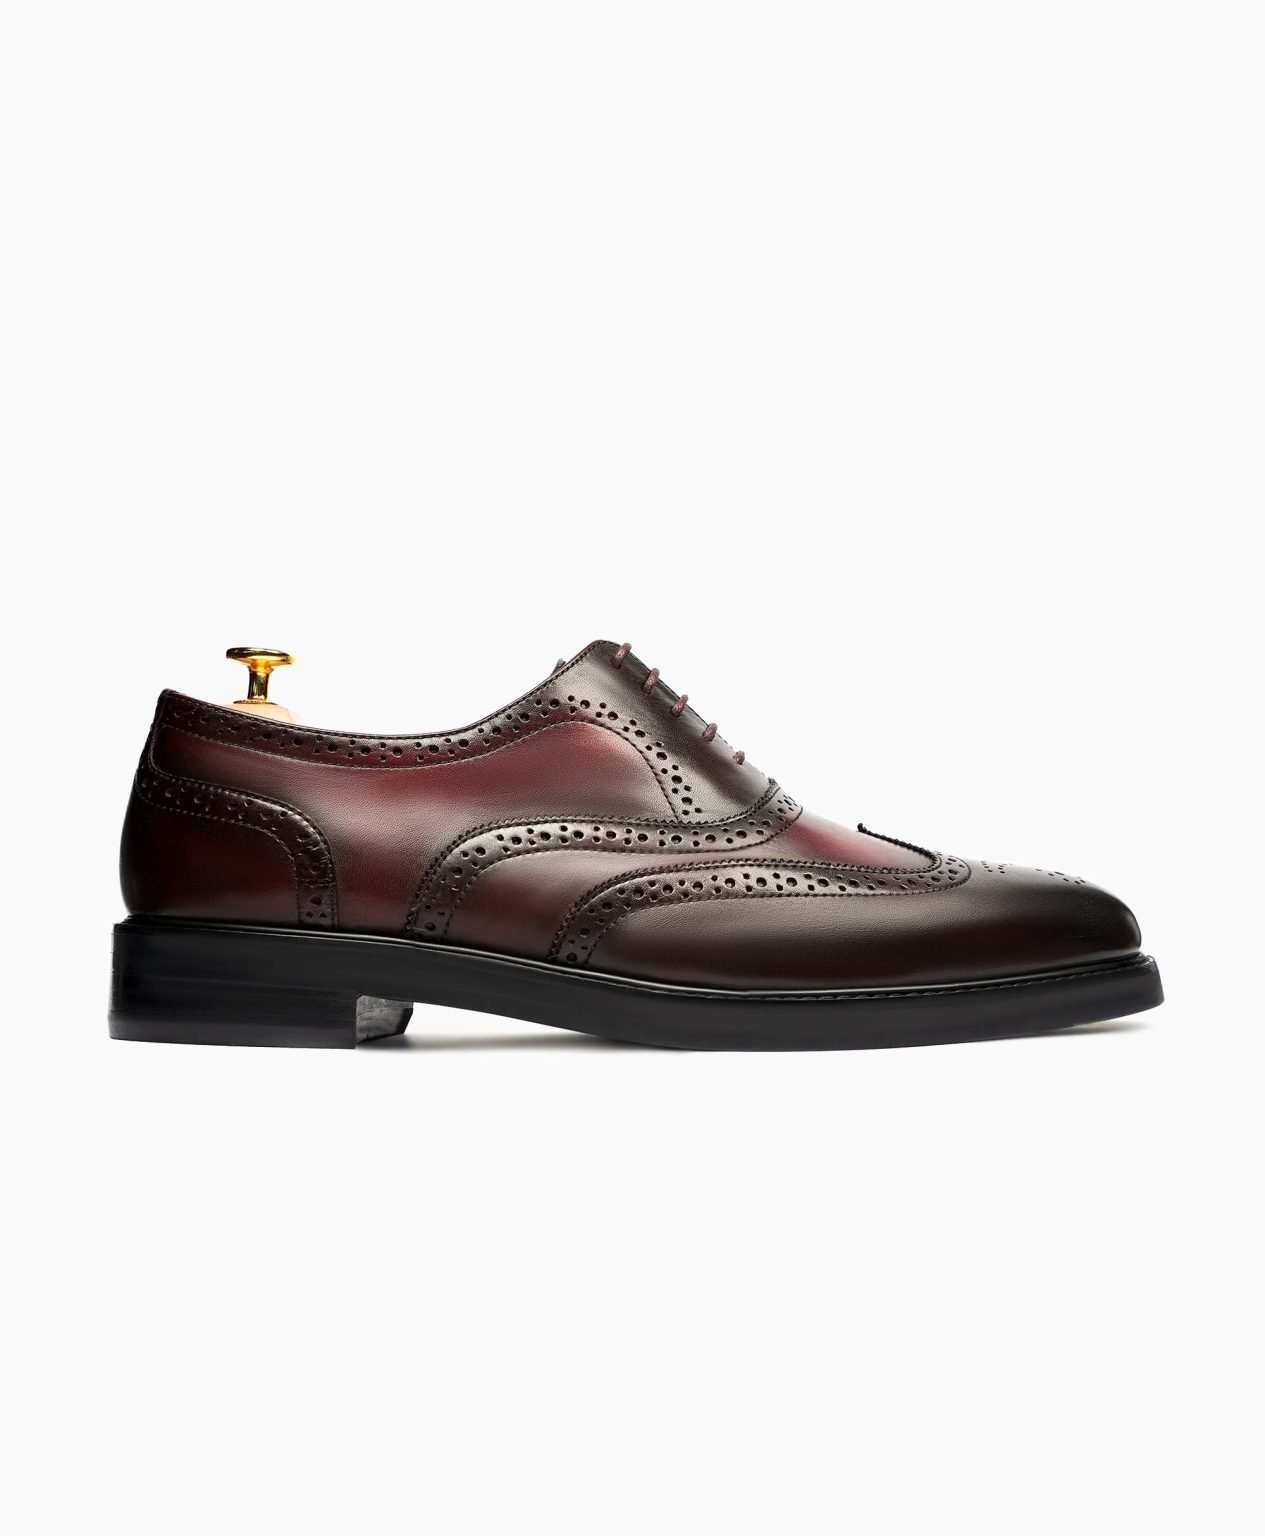 falmouth-oxford-brown-burgundy-leather-shoes-image201